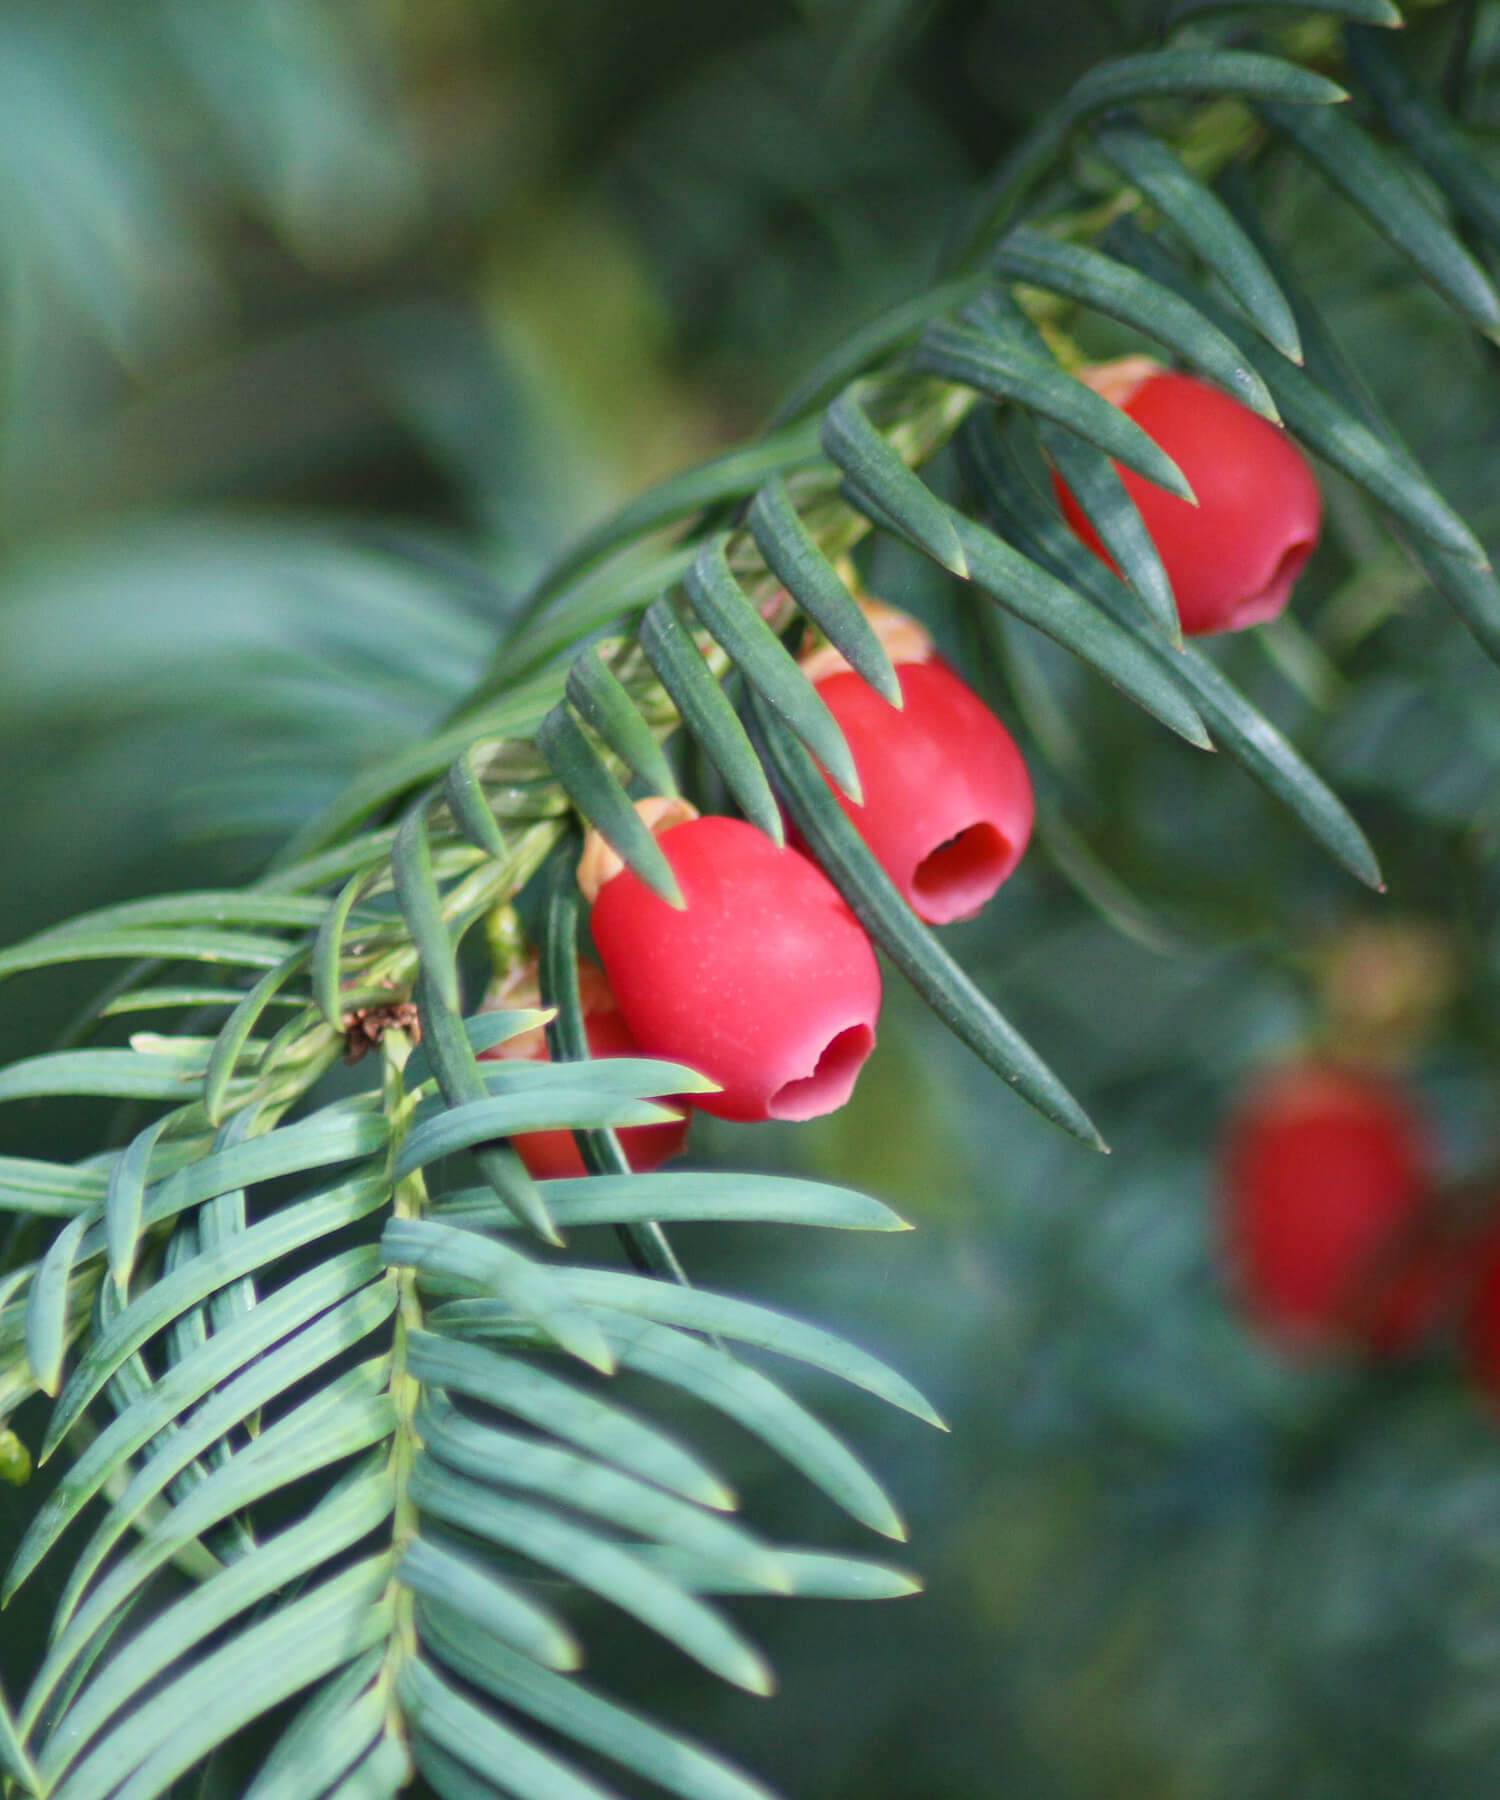 Yew leaves and fruit